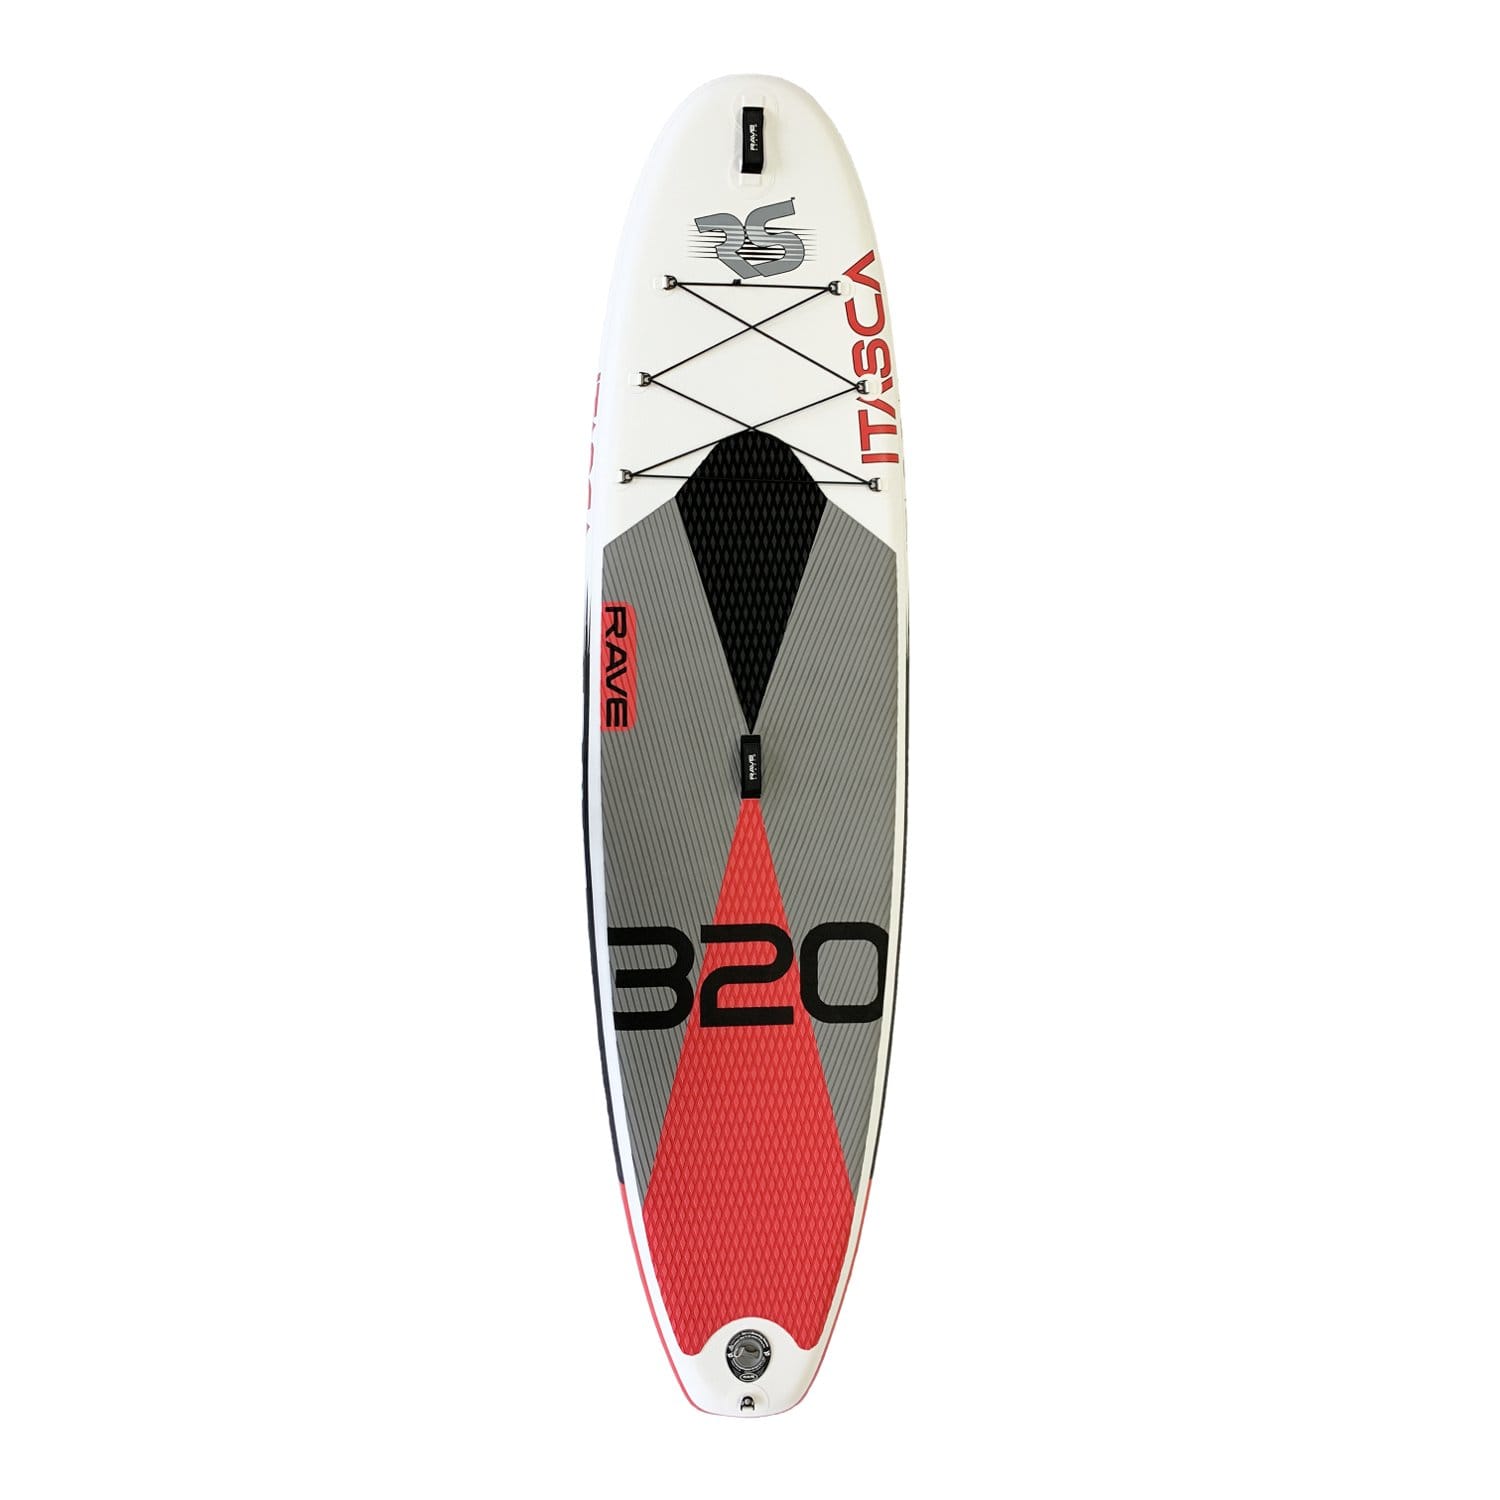 RAVE Paddle Board Itasca iSUP - Salmon Red